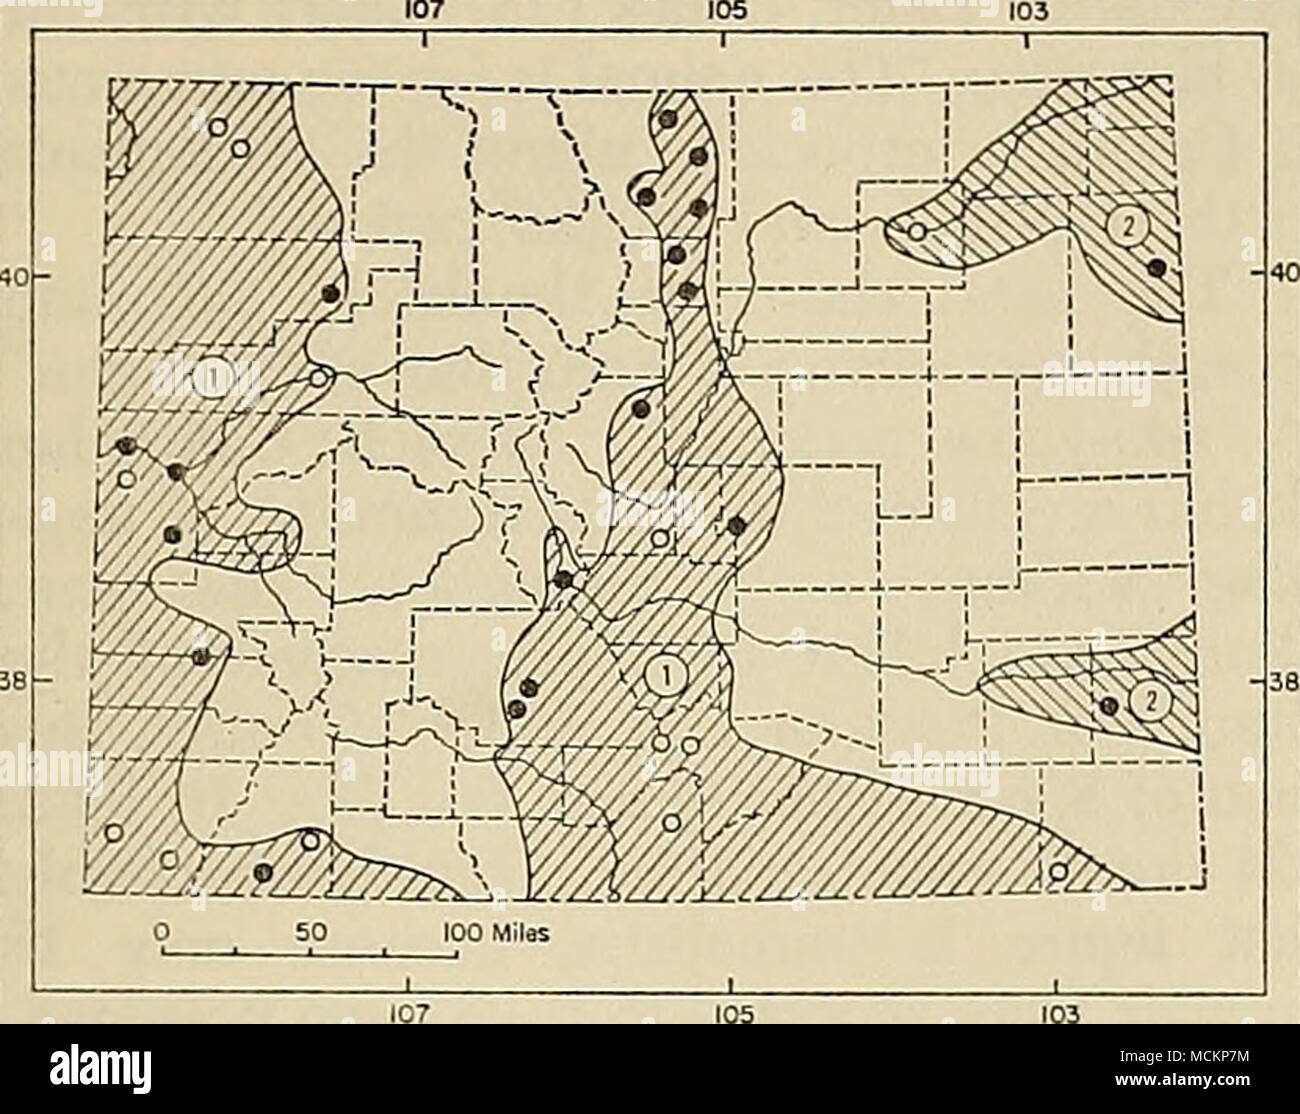 . Fig. 105. Distribution of Spilogale putorius in Colorado. 1. S. p. gracilis. 2. S. p. interrupta. For explanation of symbols, see p. 9. 50.2; zygomatic breadth, 35.60 (34.9-38.6), 33.0, 30.5; interorbital constriction, 14.56 (14.1-15.1), 13.9, 13.5; postorbital constric- tion, 13.20 (12.8-13.9), —, 13.4; mastoid breadth, 31.55 (29.1-33.3), 28.3, 27.2; length of maxillary toothrow, 17.43 (16.1-18.8), 16.1, 16.3. Remarks.—It is not known whether the ranges of S. p. gracilis and S. p. interrupta meet in Colorado, and the intergradation be- tween the two subspecies has not been dem- onstrated in Stock Photo